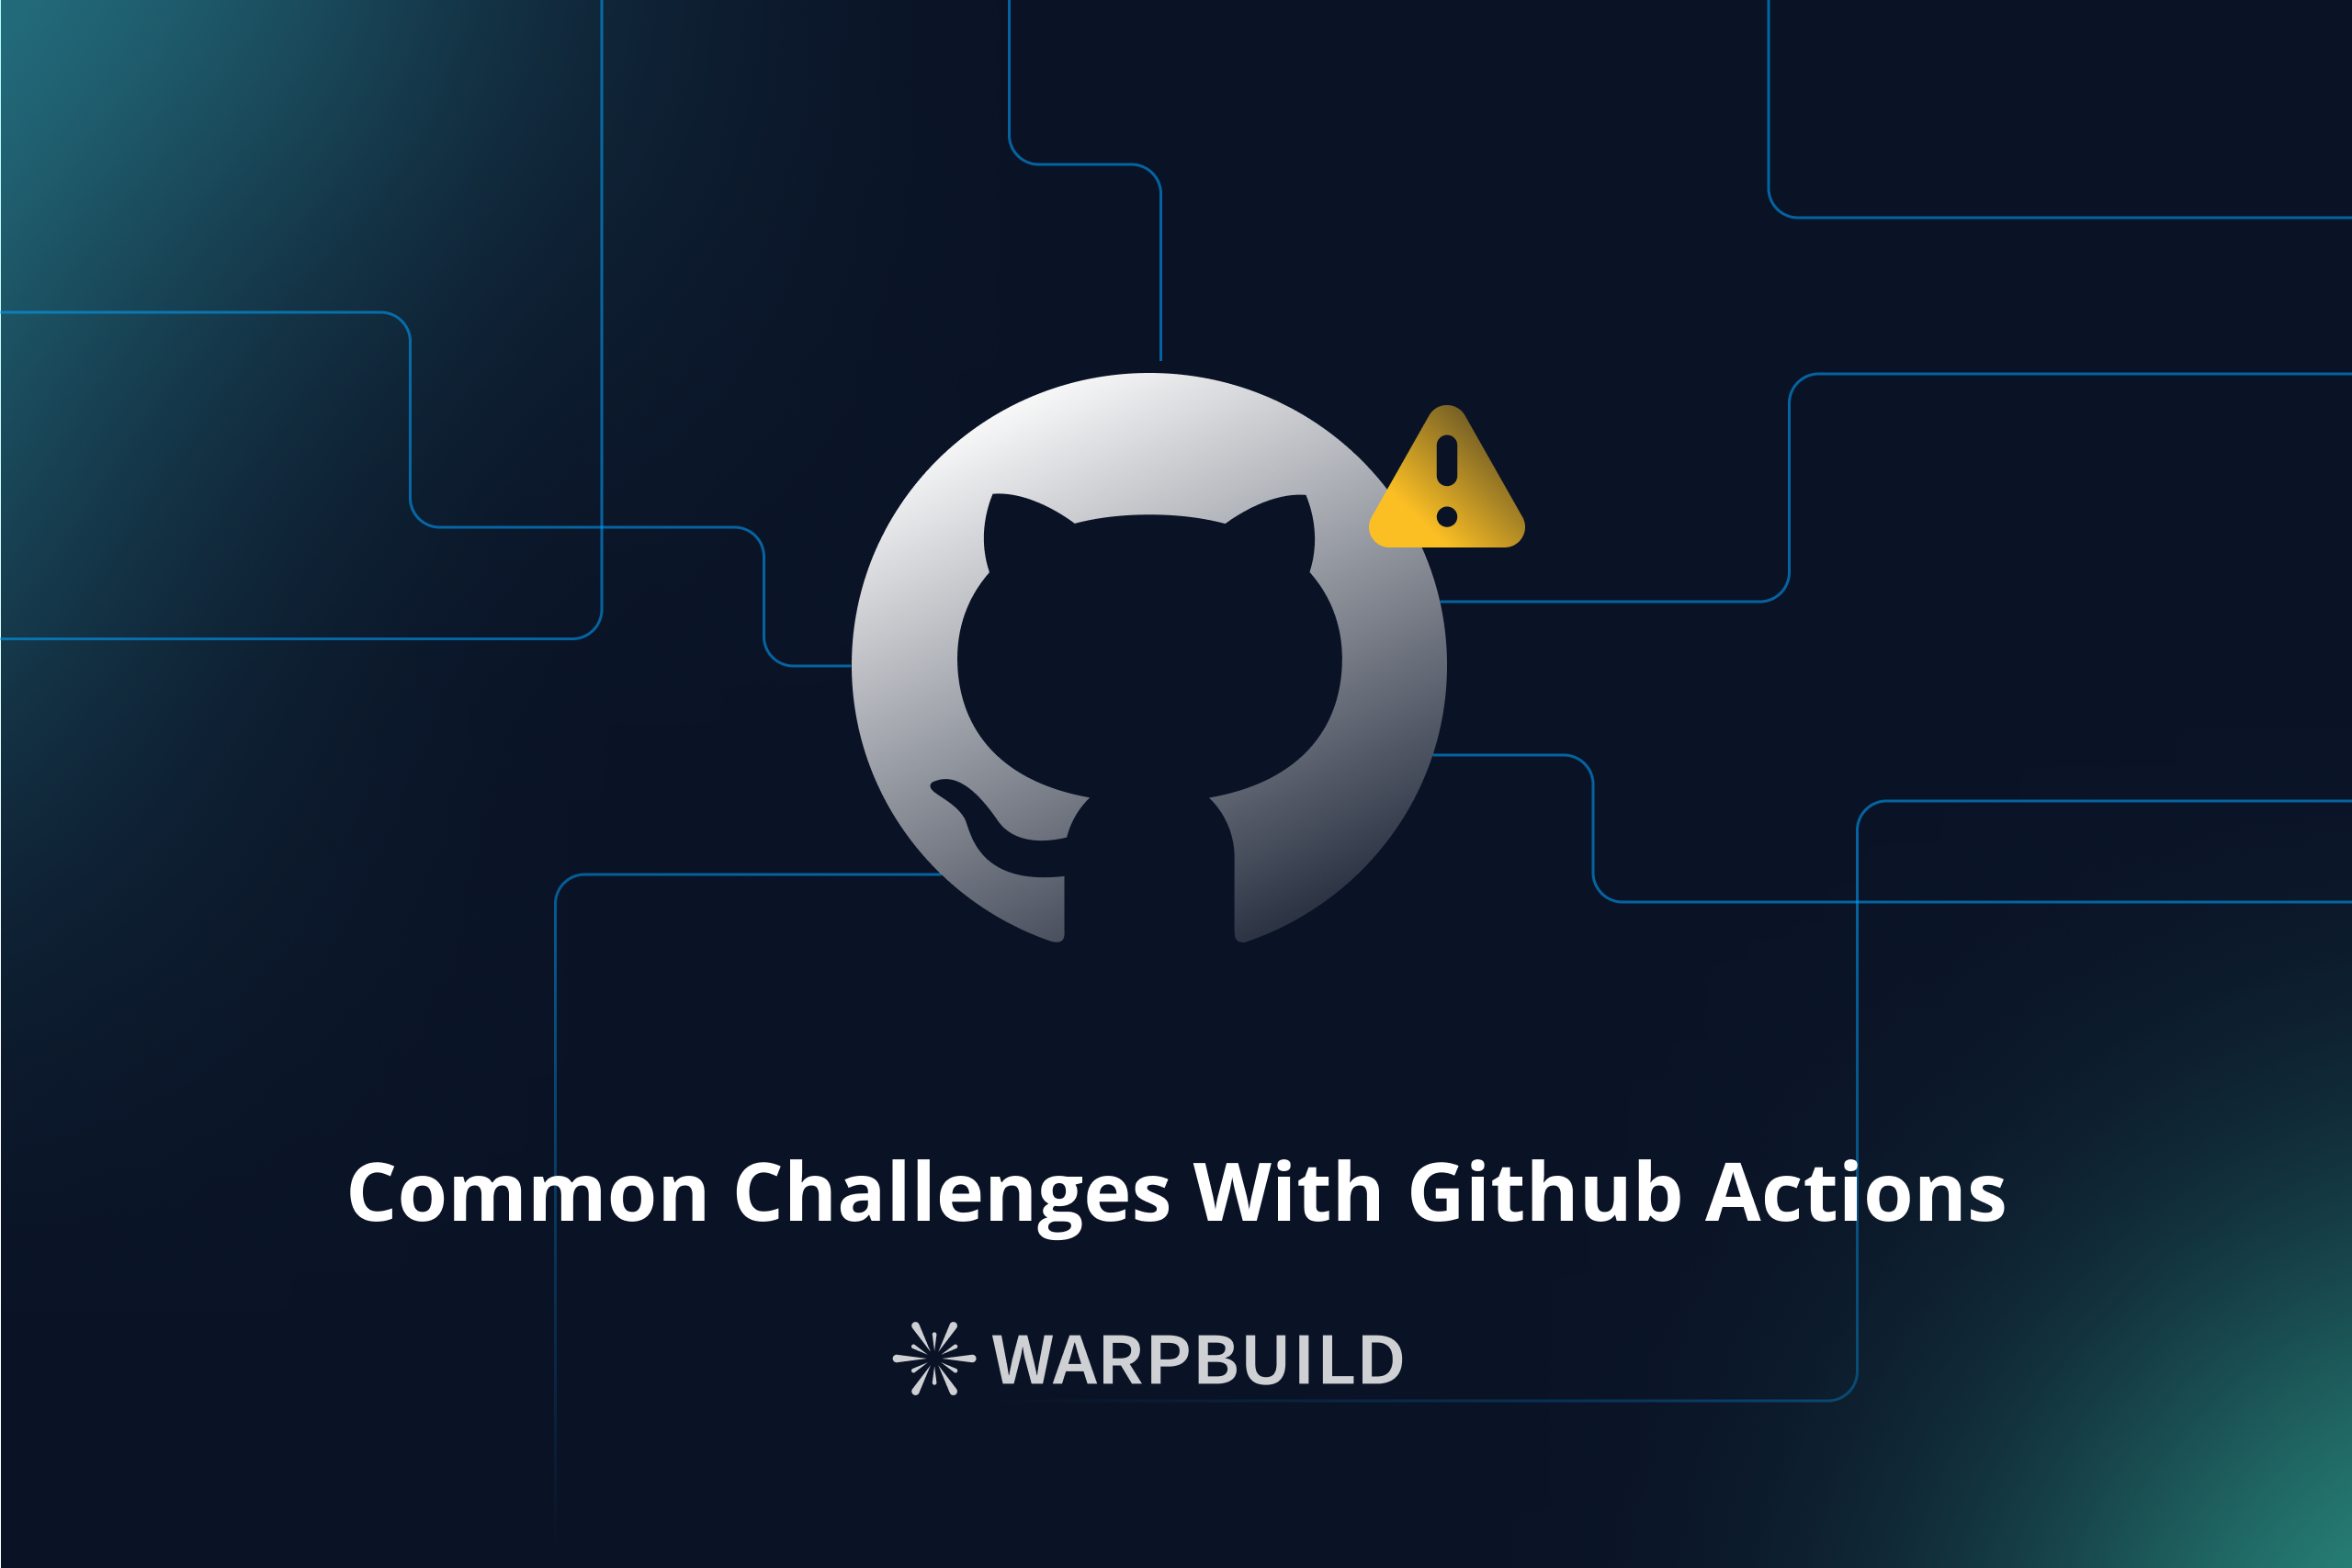 Common challenges with GitHub Actions